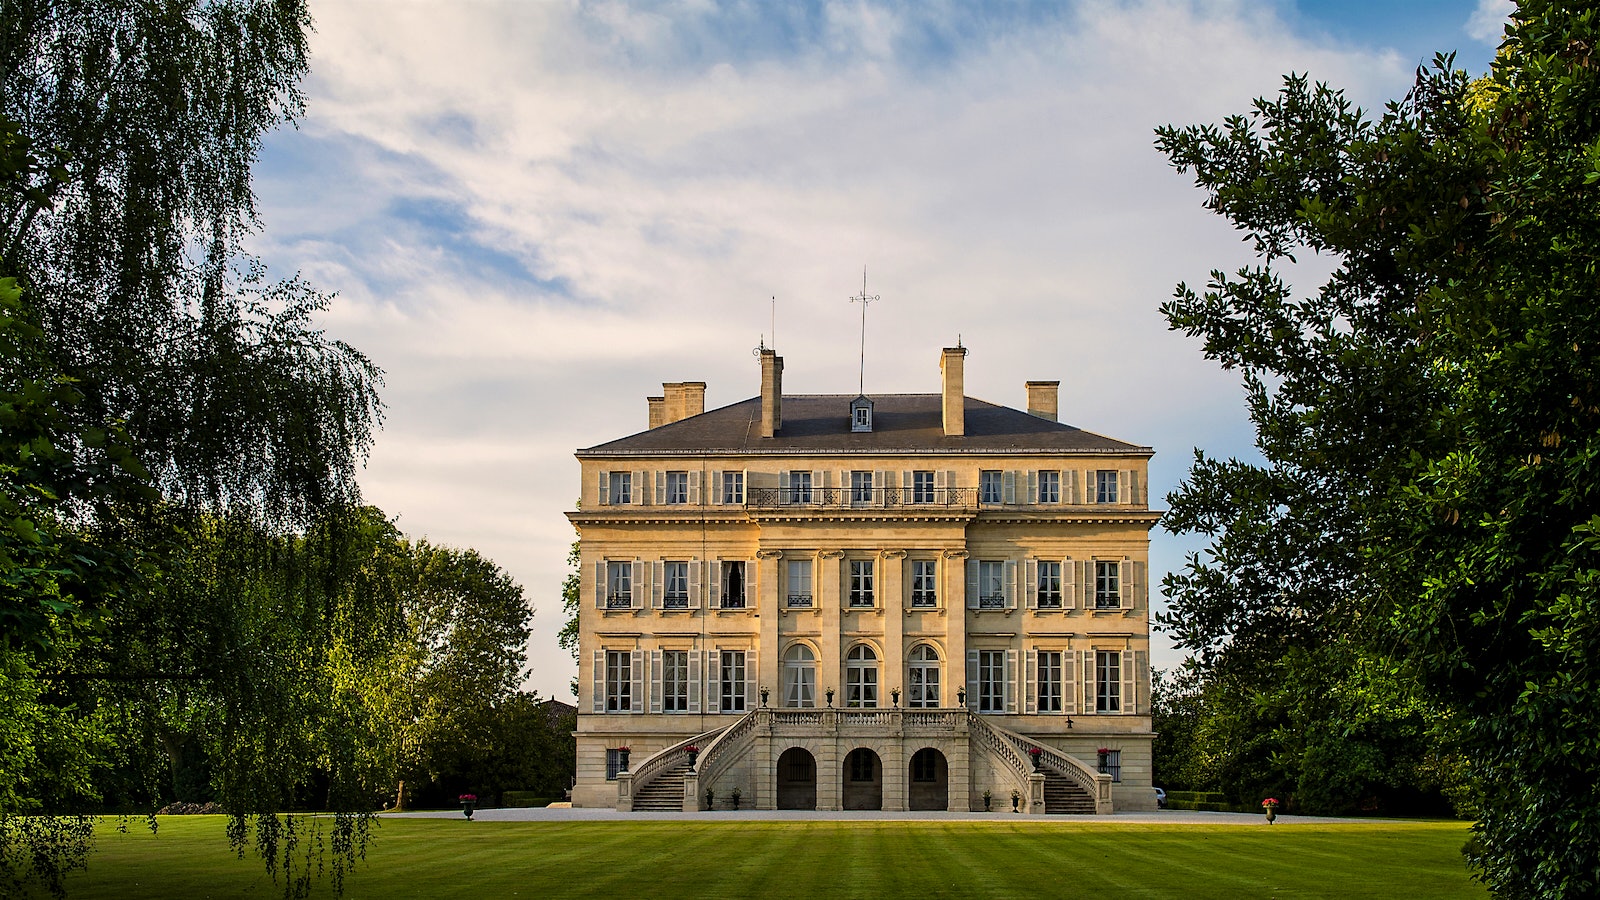  Chateaux Margaux's estate house is pictured with a blue sky